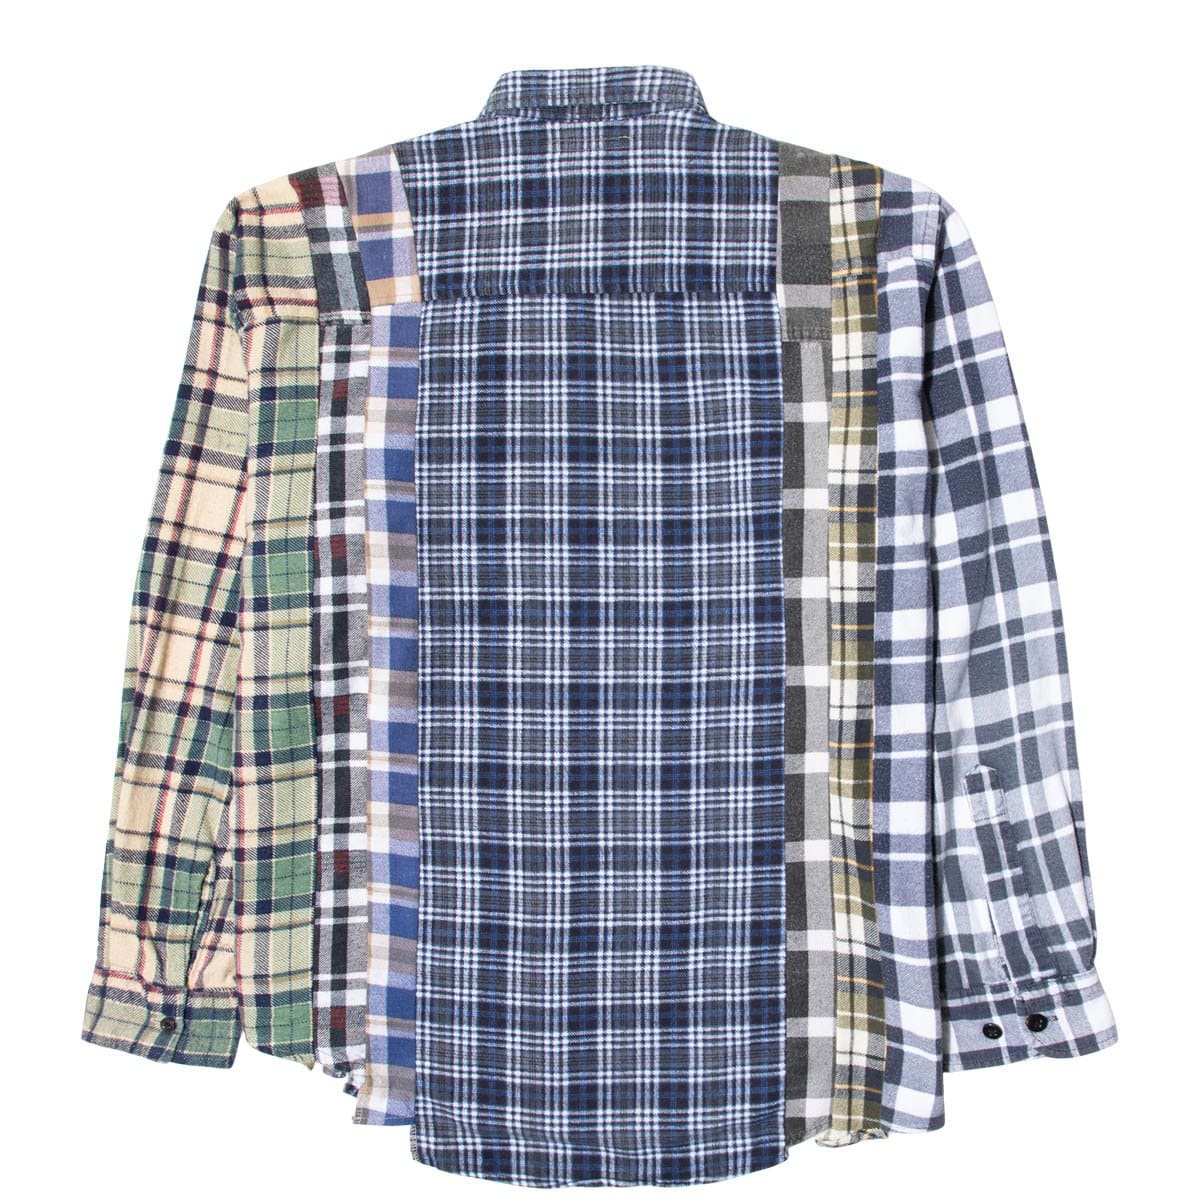 Needles Shirts ASSORTED / M 7 CUTS FLANNEL SHIRT SS21 9